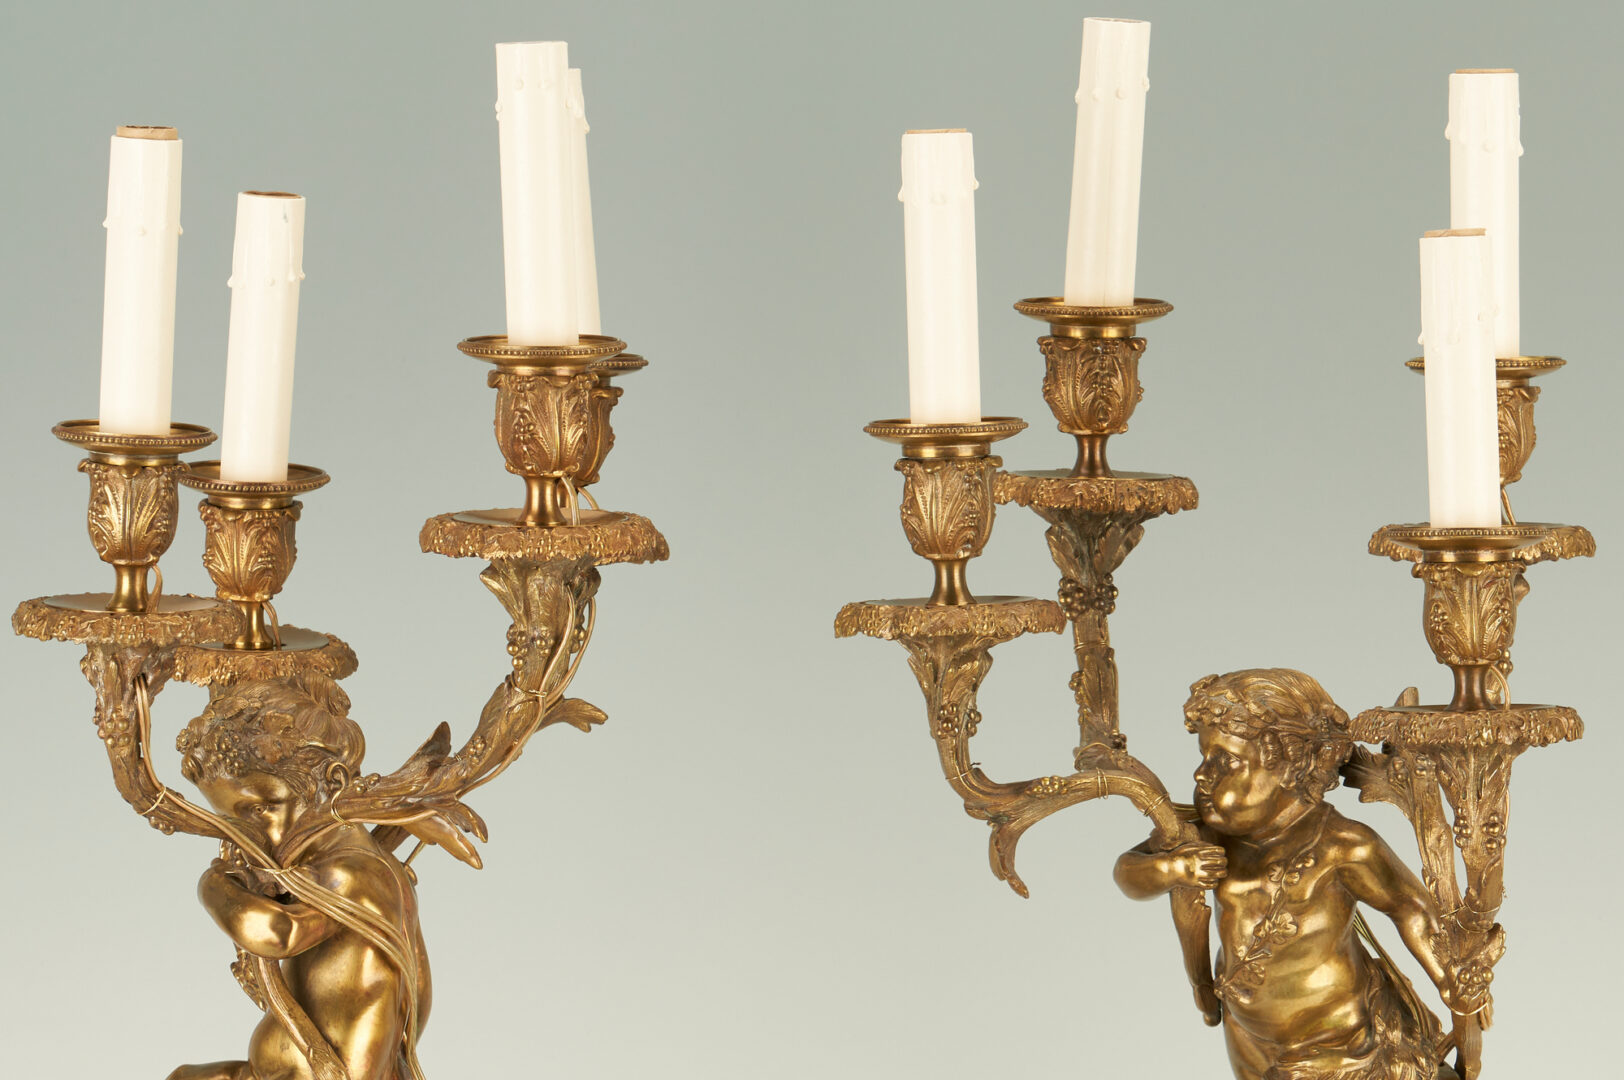 Lot 249: Pair French Bronze Figural Candelabras, After Clodion